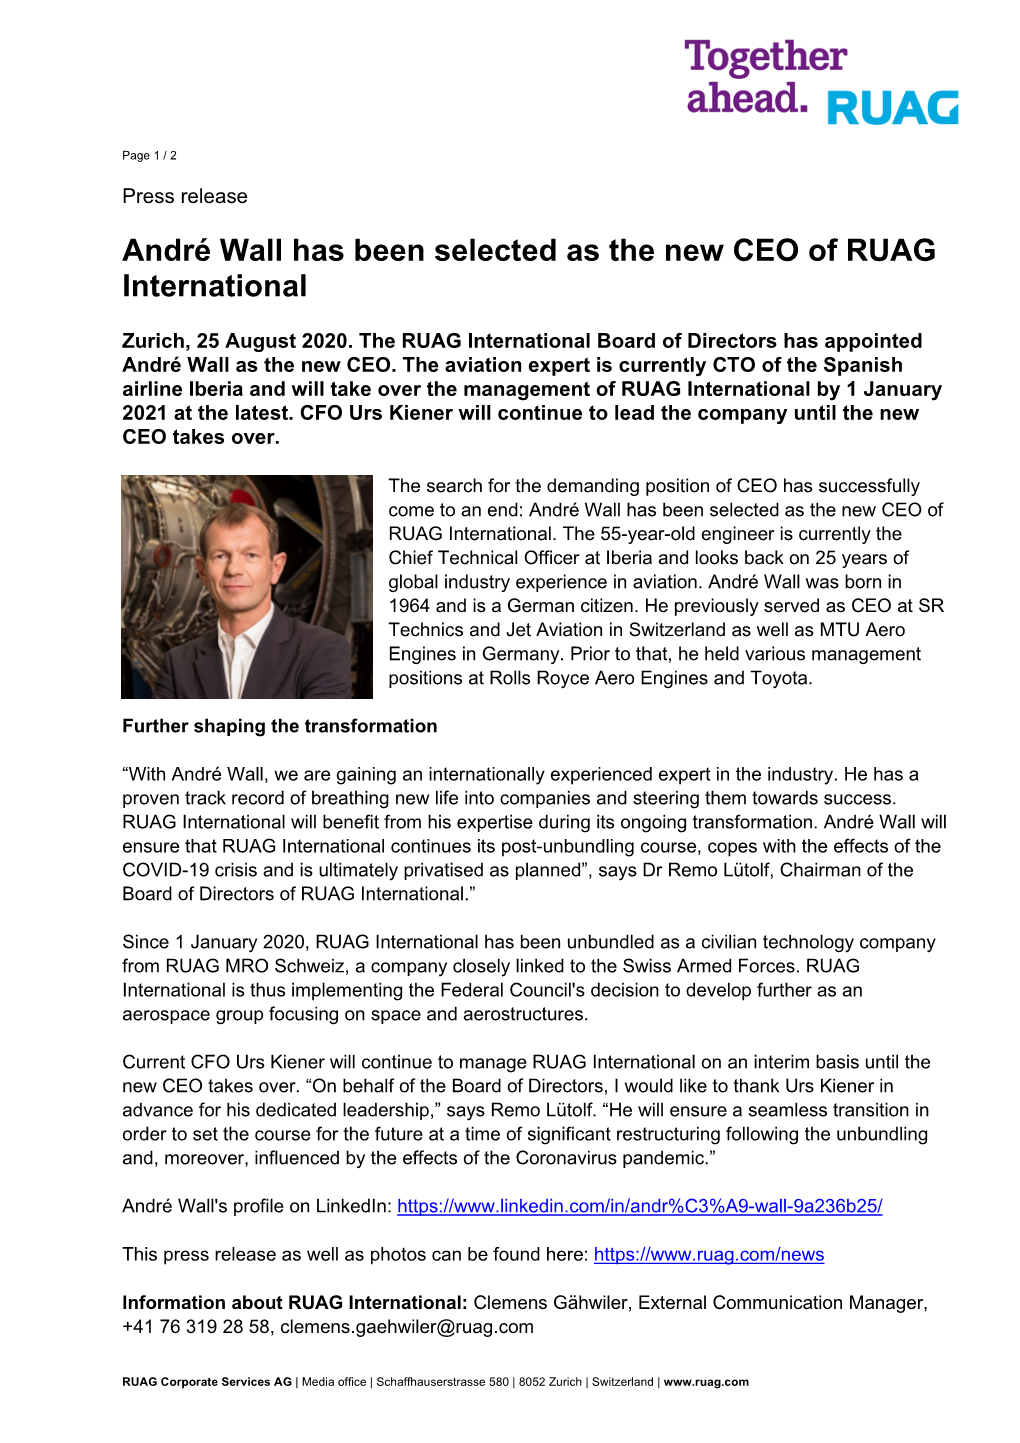 André Wall Has Been Selected As the New CEO of RUAG International